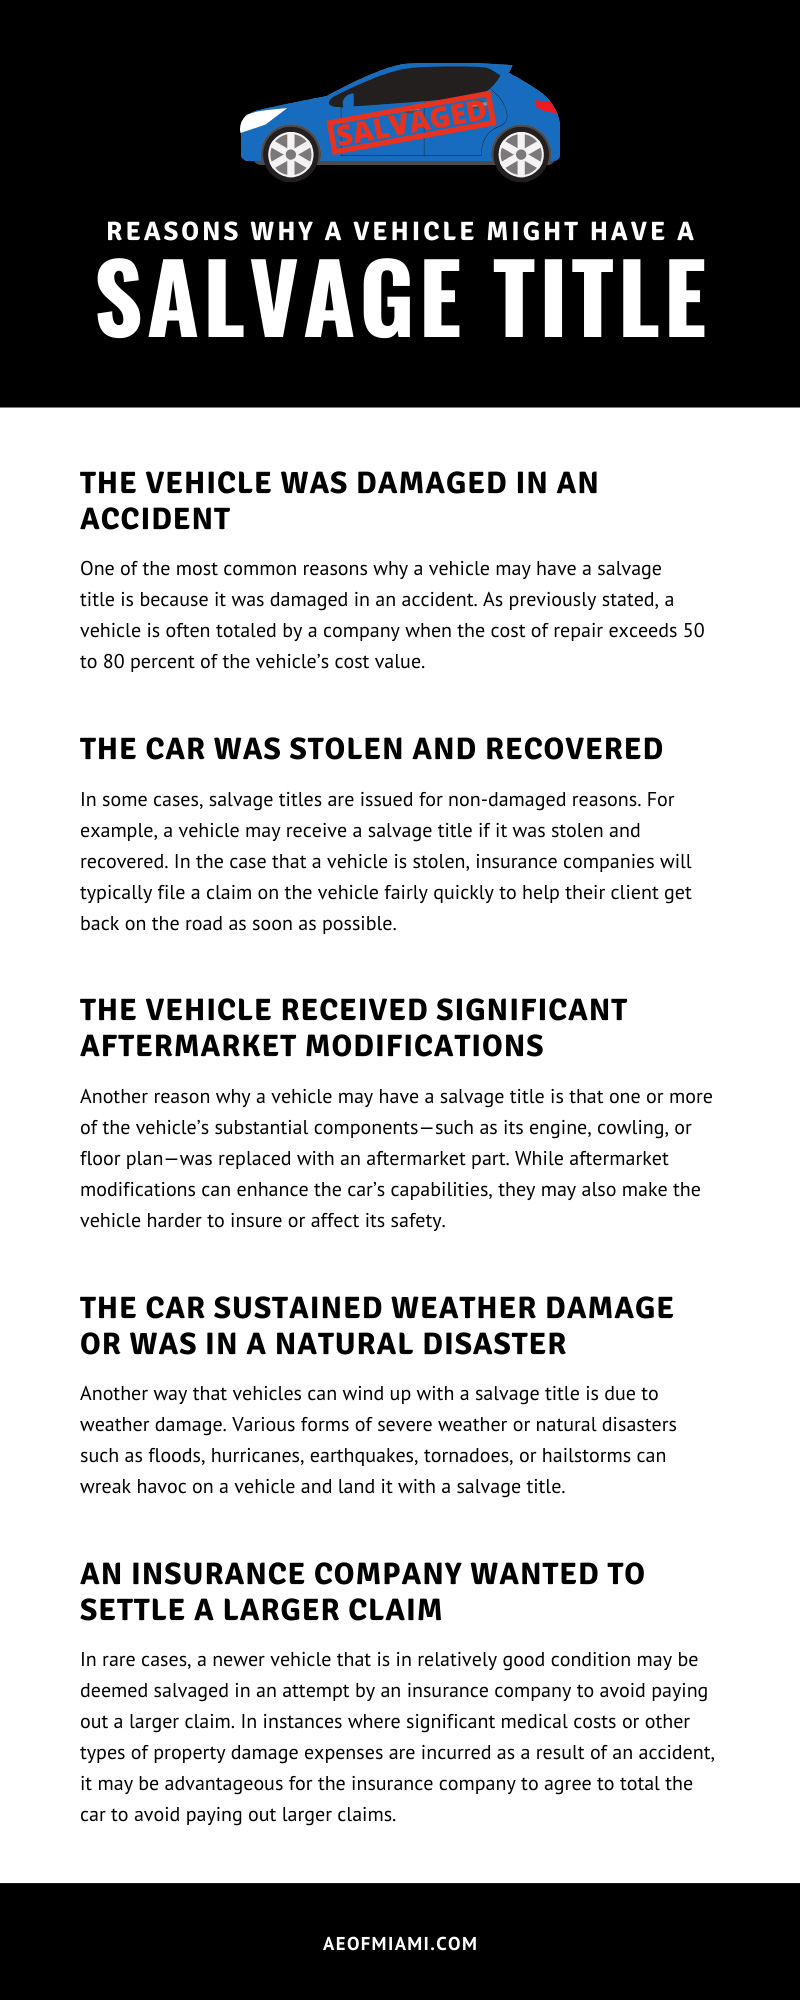 Infographic: Reasons Why a Vehicle Might Have a Salvage Title